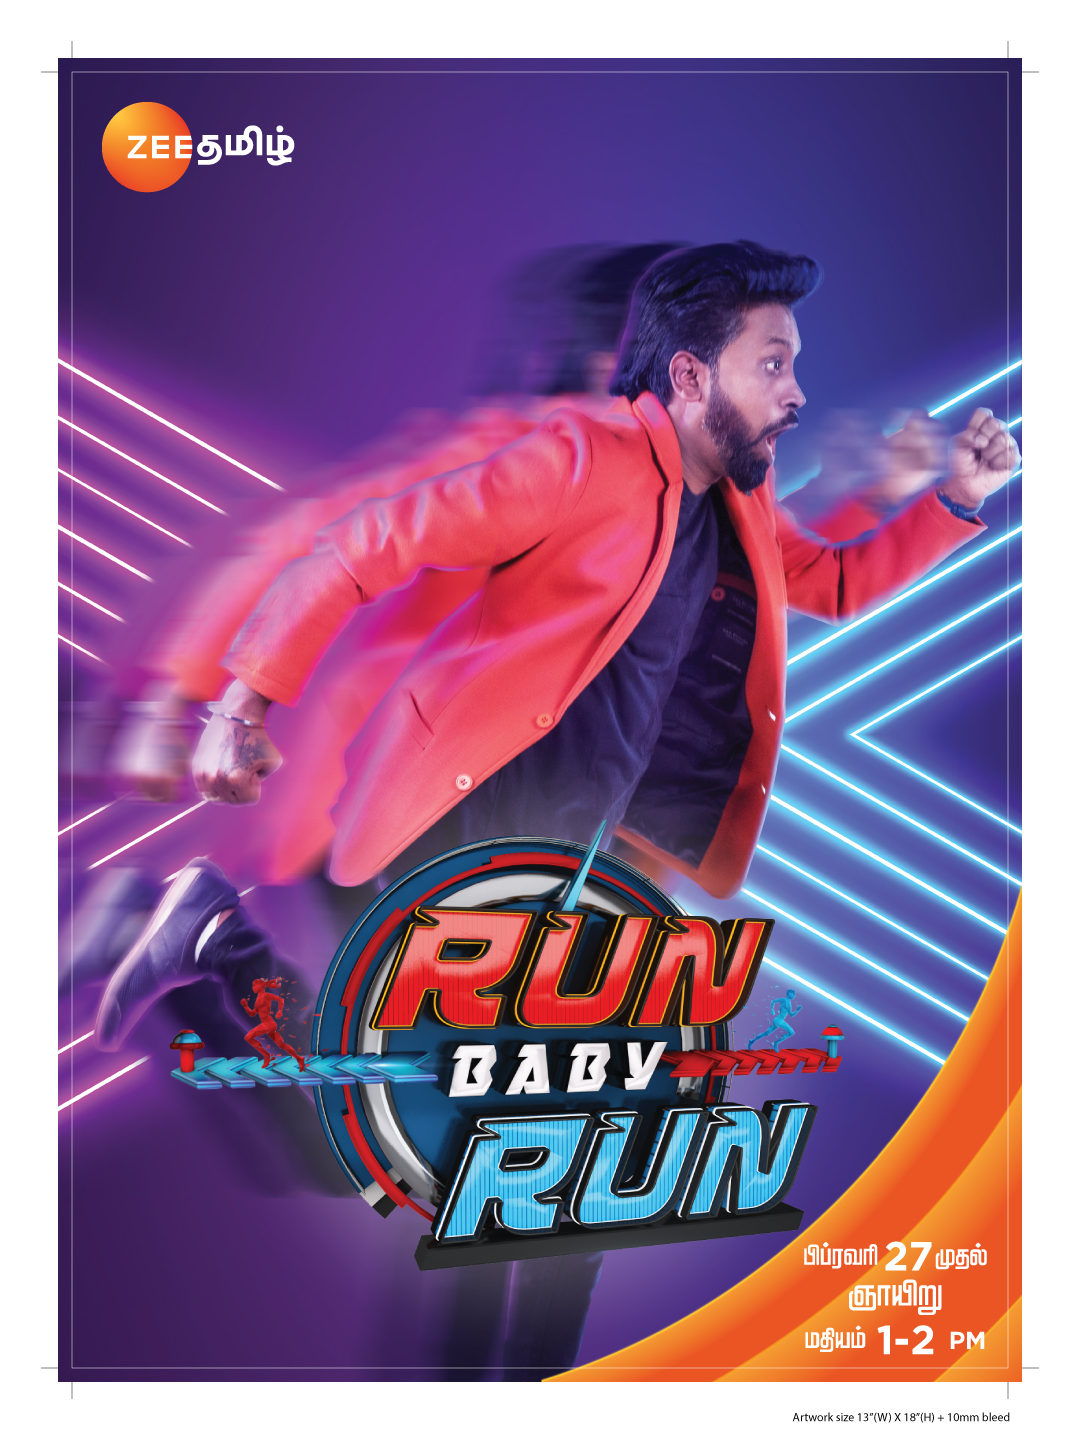 Zee Tamil launches a clutter breaking reality show Run Baby Run 